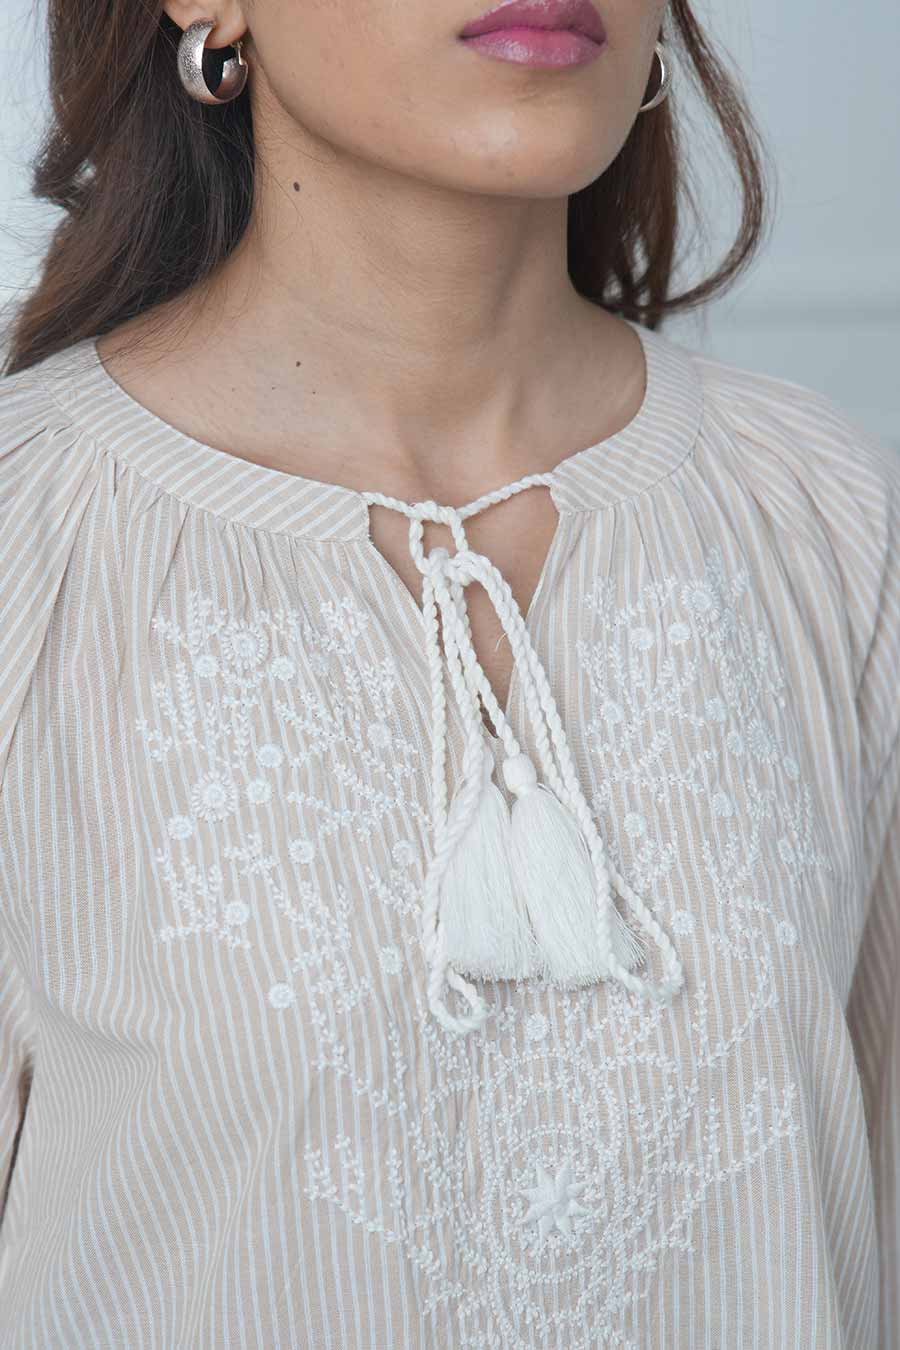 Beige Embroidered Top